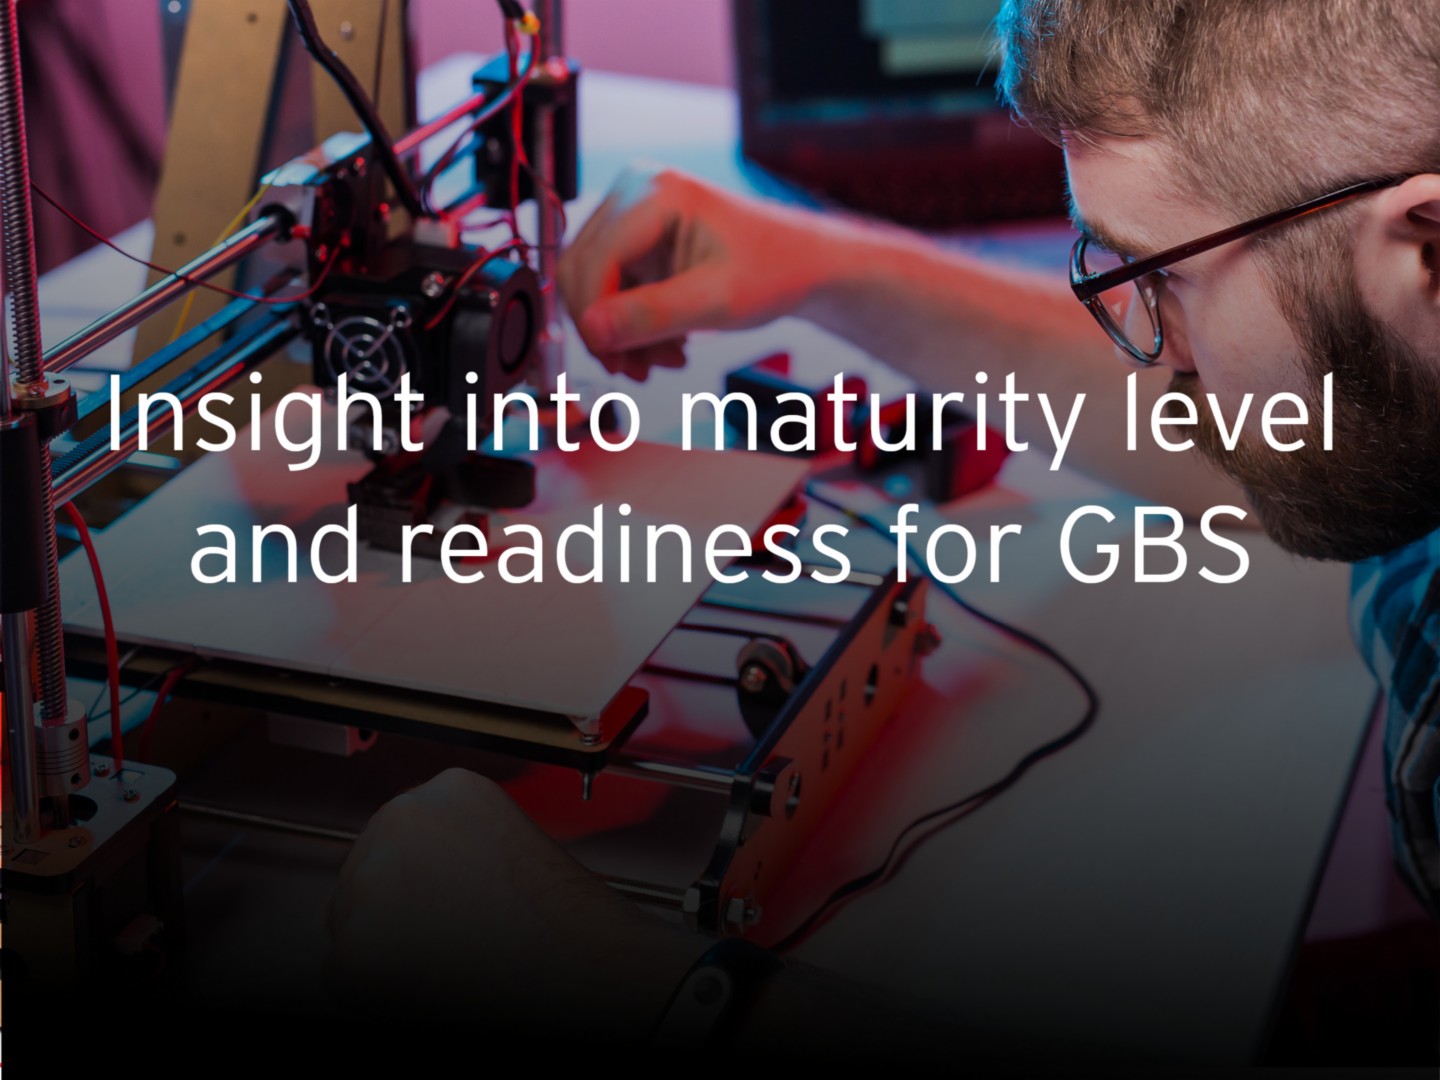 Insight into maturity level and readiness for GBS